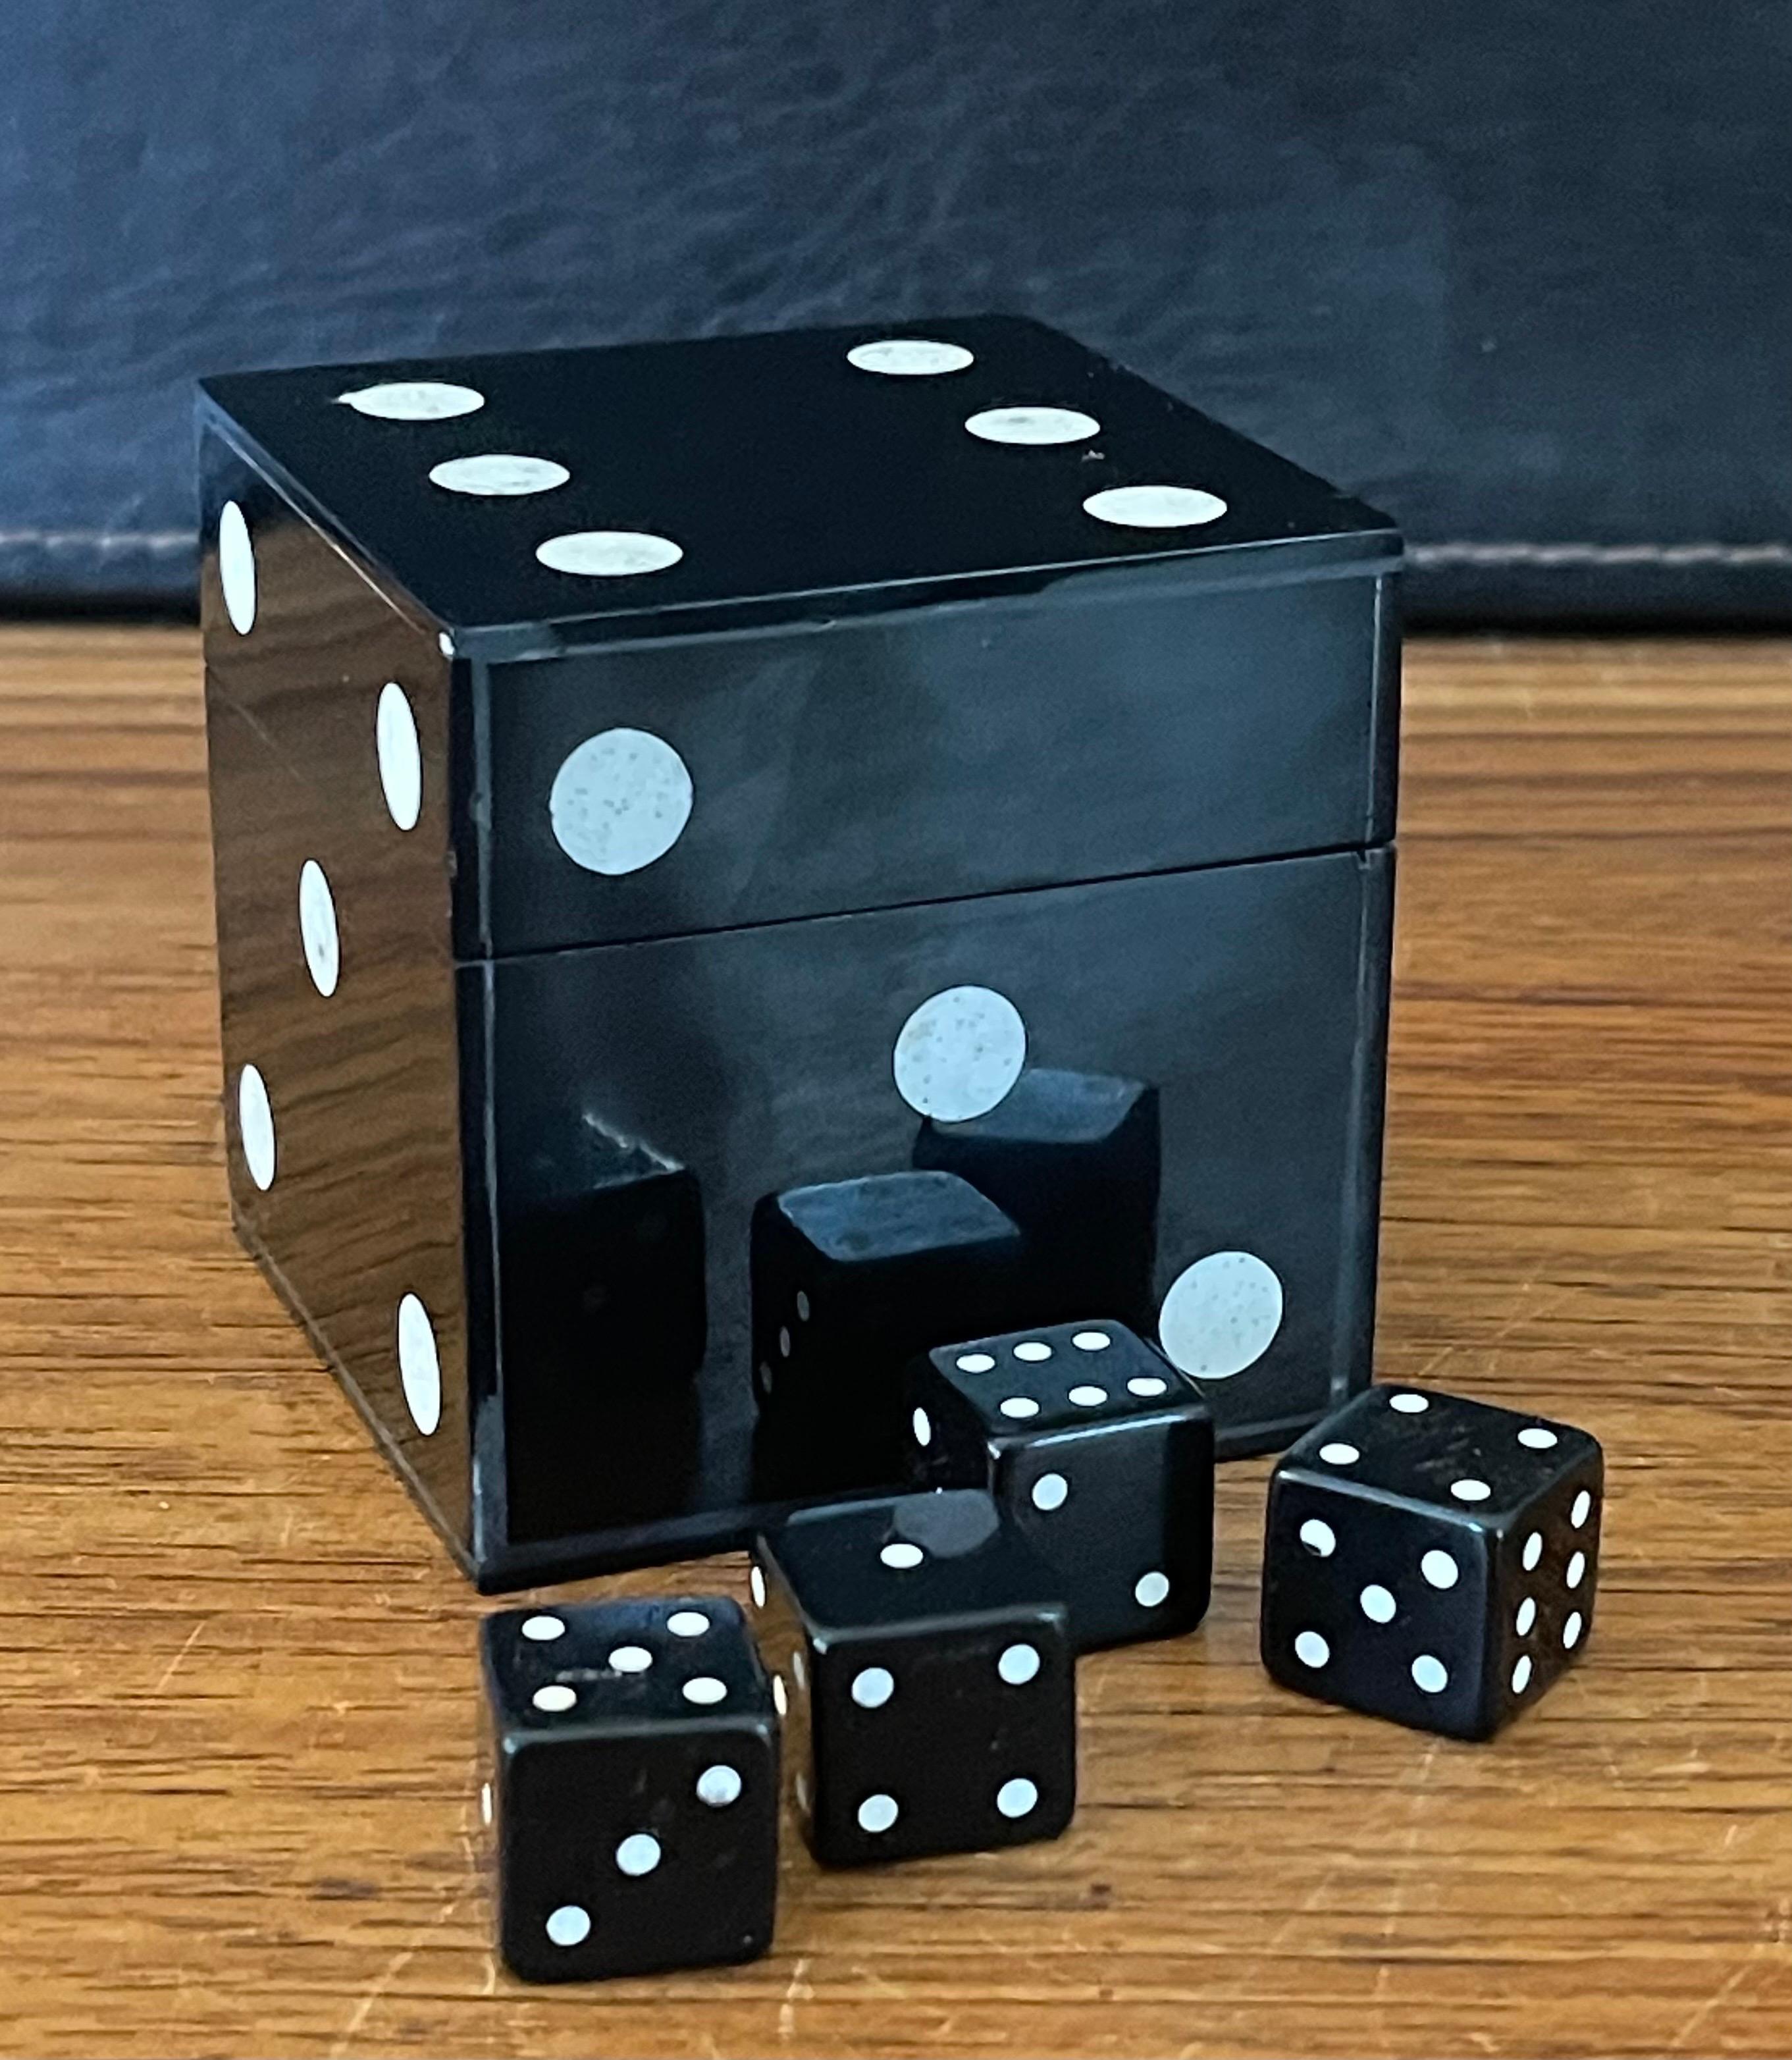 A cool die /dice paperweight / trinket box with four small dice, circa 1990s. The piece is a lidded wood box covered in black laminate at has a lid and two pair of black dice inside. The box measures 2.75